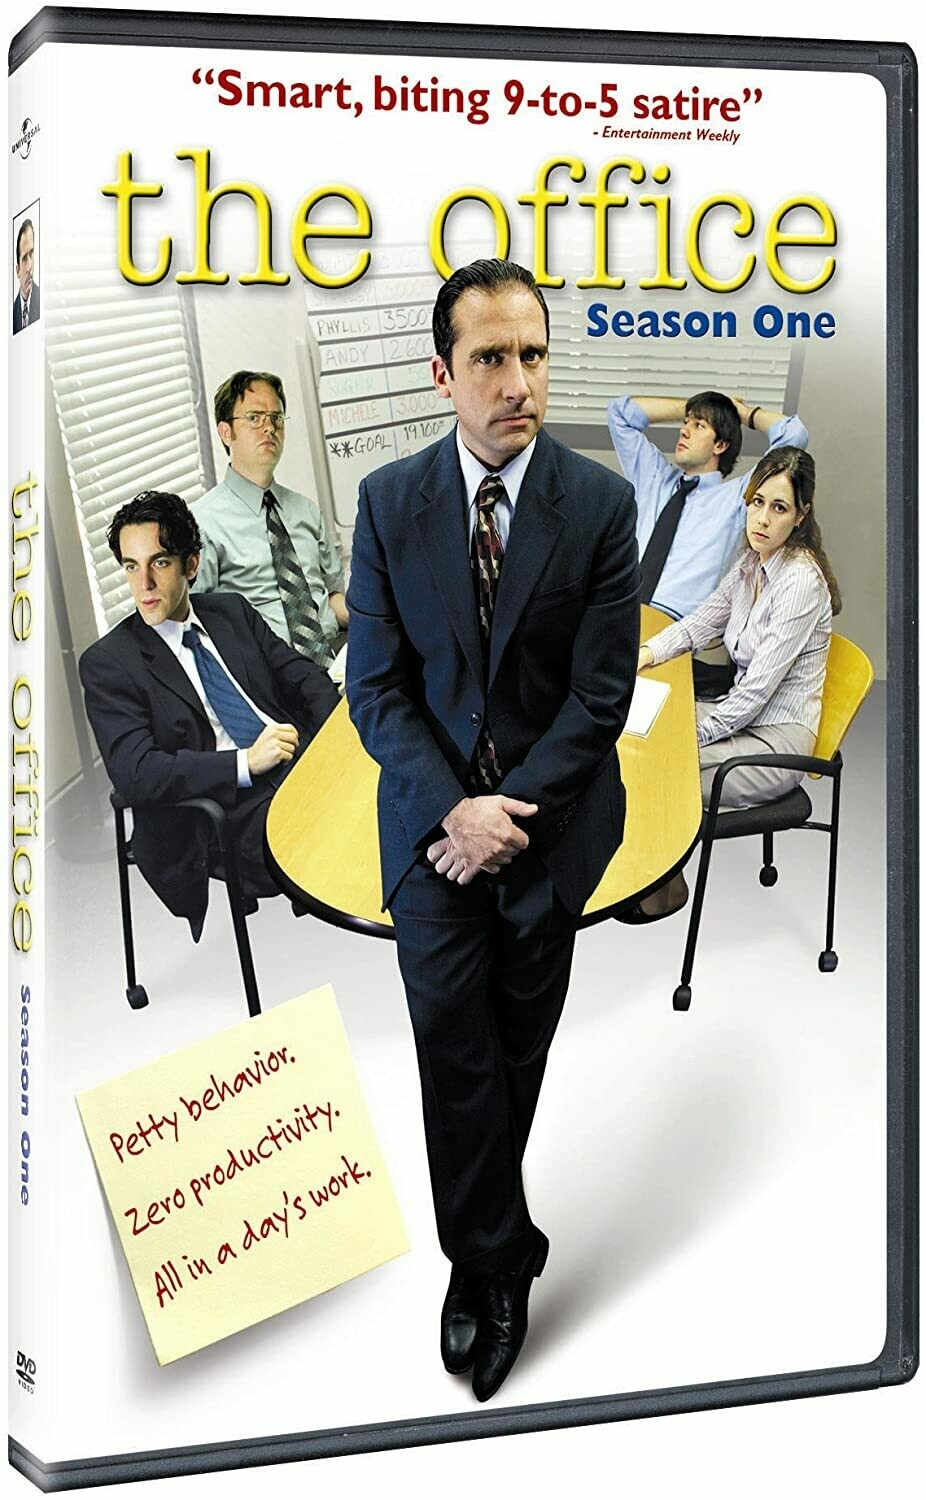 Office, The Season One (7 day rental)